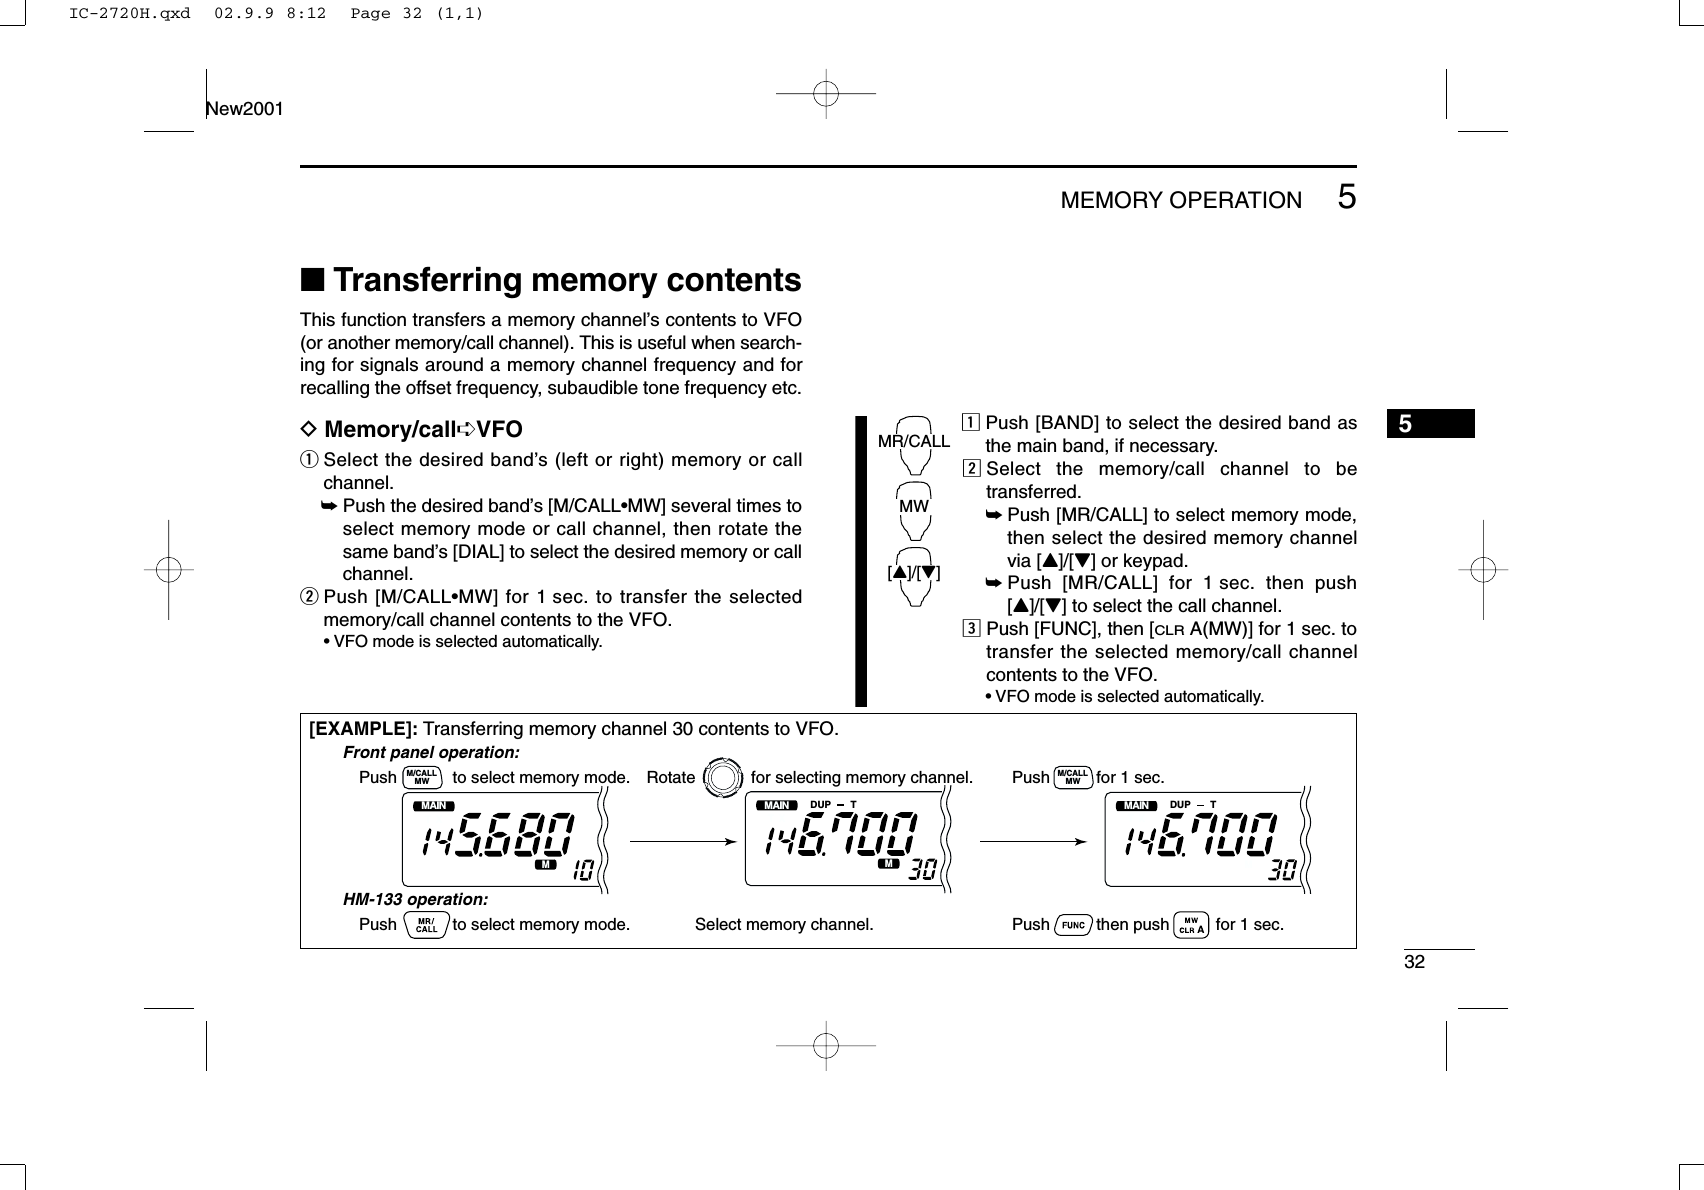 325MEMORY OPERATIONNew20015■Transferring memory contentsThis function transfers a memory channel’s contents to VFO(or another memory/call channel). This is useful when search-ing for signals around a memory channel frequency and forrecalling the offset frequency, subaudible tone frequency etc.DMemory/call➪VFOqSelect the desired band’s (left or right) memory or callchannel.➥Push the desired band’s [M/CALL•MW] several times toselect memory mode or call channel, then rotate thesame band’s [DIAL] to select the desired memory or callchannel.wPush [M/CALL•MW] for 1 sec. to transfer the selectedmemory/call channel contents to the VFO.•VFO mode is selected automatically.zPush [BAND] to select the desired band asthe main band, if necessary.xSelect the memory/call channel to betransferred.➥Push [MR/CALL] to select memory mode,then select the desired memory channelvia [Y]/[Z] or keypad.➥Push [MR/CALL] for 1 sec. then push[Y]/[Z] to select the call channel.cPush [FUNC], then [CLRA(MW)] for 1 sec. totransfer the selected memory/call channelcontents to the VFO.•VFO mode is selected automatically.MR/CALLMW[Y]/[Z][EXAMPLE]: Transferring memory channel 30 contents to VFO.MAINT  XMMAINT  XDUP TMMAINT  XDUP TMPush            to select memory mode.Front panel operation:HM-133 operation:Push            to select memory mode.Rotate            for selecting memory channel.Select memory channel.Push          for 1 sec.Push          then push          for 1 sec.MWM/CALLMWM/CALLIC-2720H.qxd  02.9.9 8:12  Page 32 (1,1)